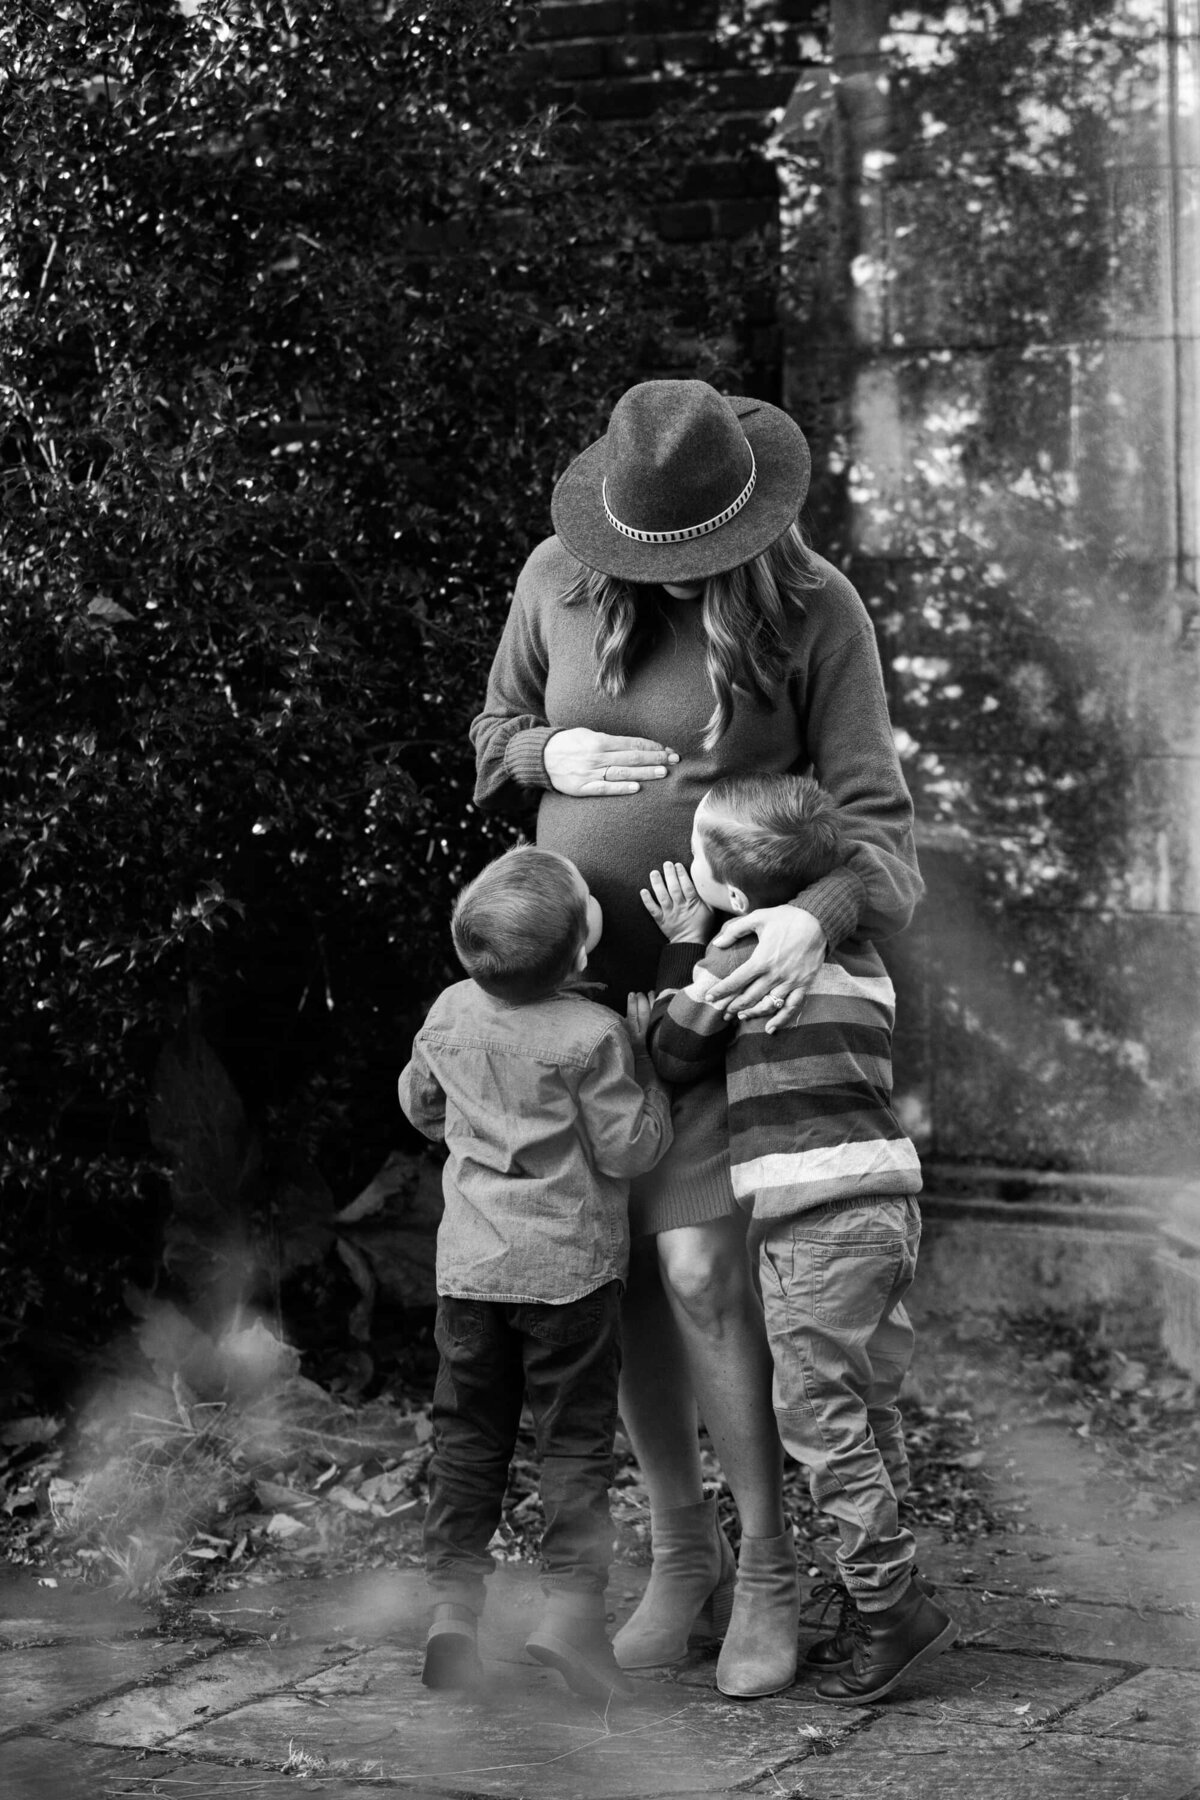 A pregnant woman wearing a hat stands while two young children affectionately touch her belly, captured beautifully by a maternity photographer from Pittsburgh.